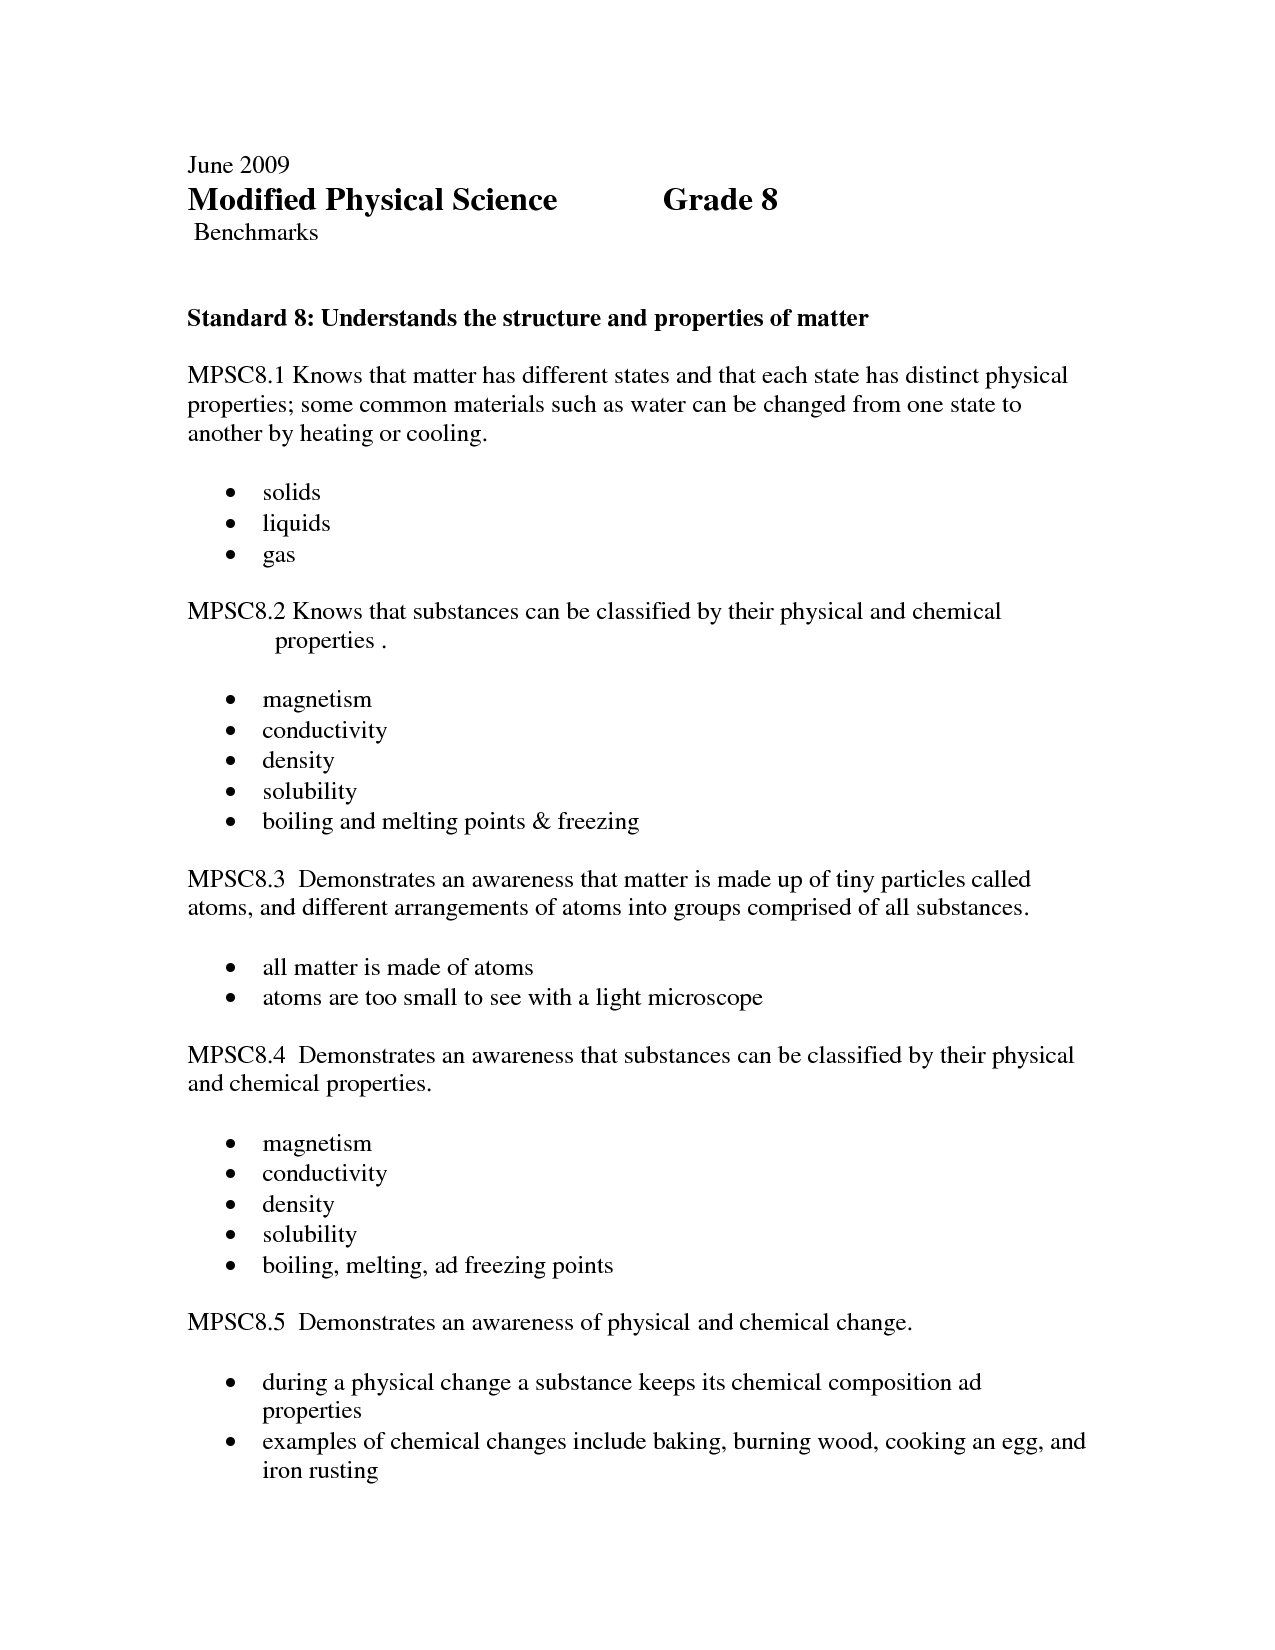 8th Grade Physical Science Worksheets Image